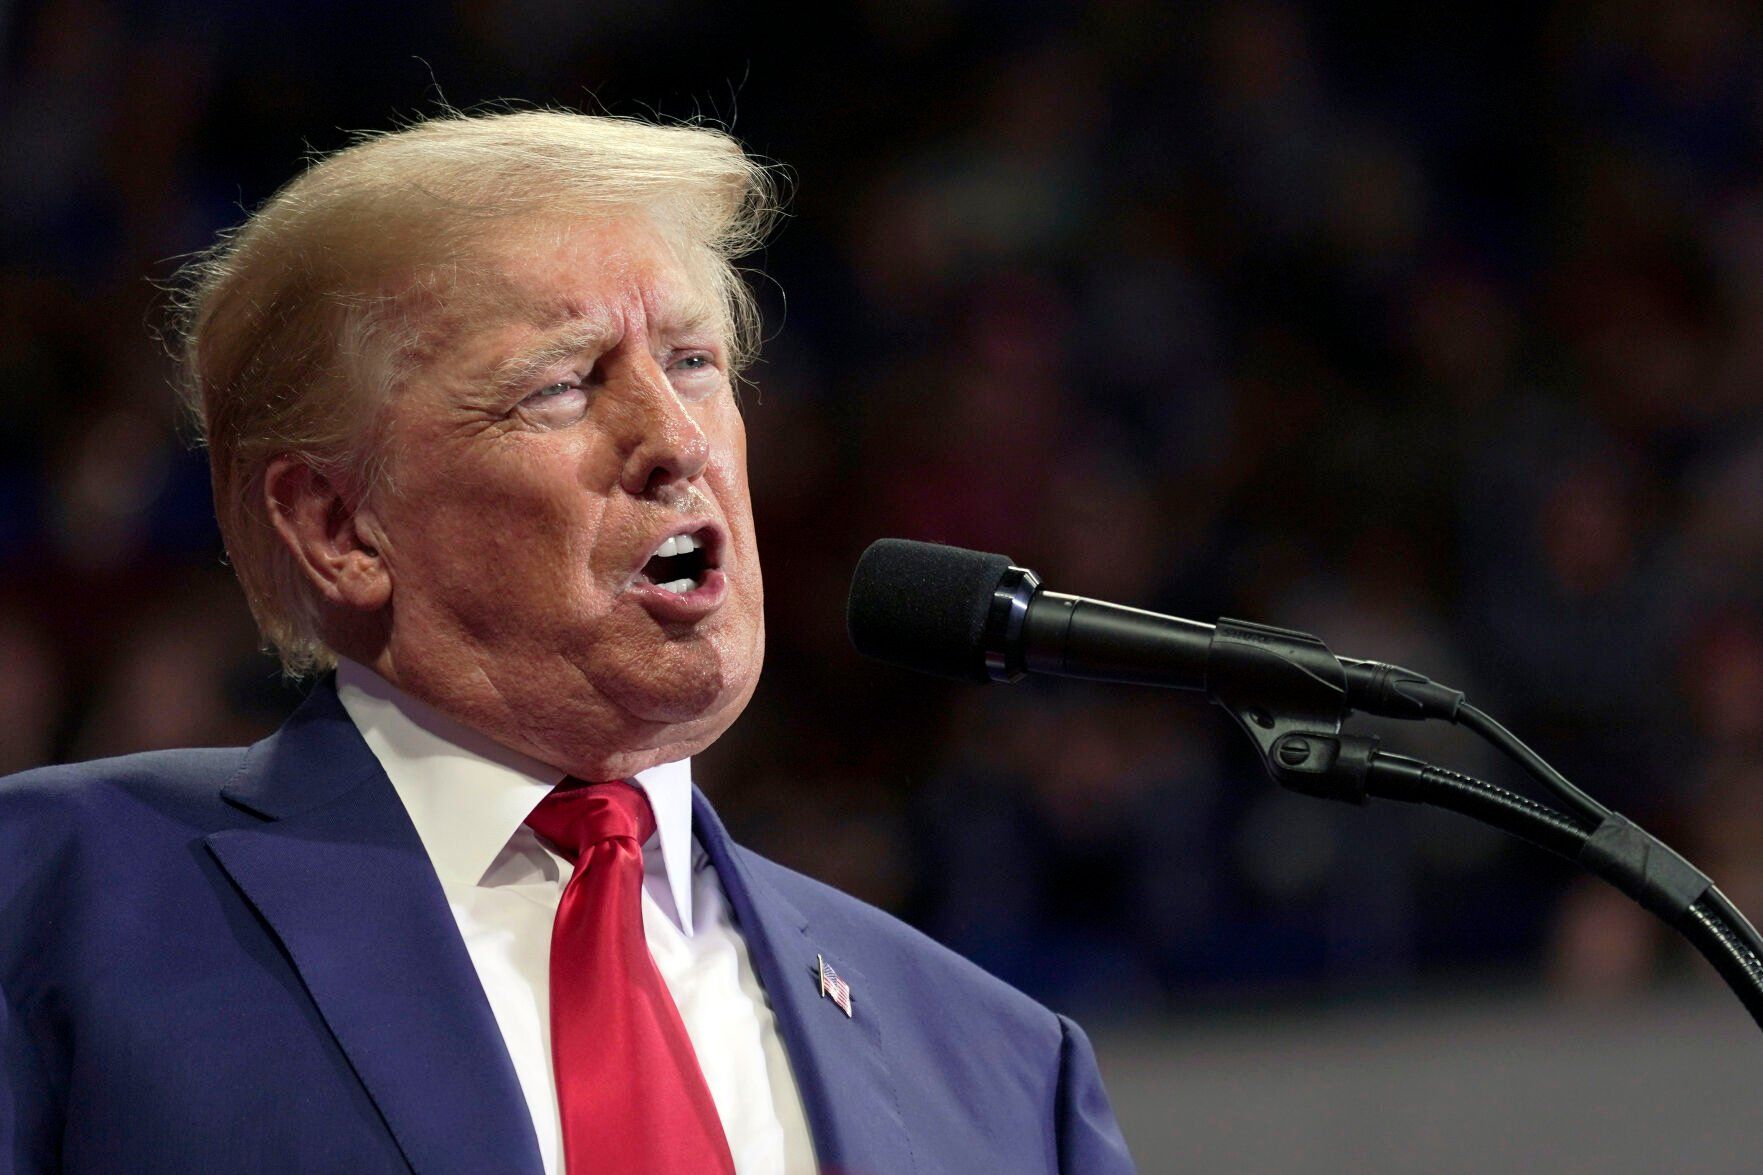 <p>FILE - Former President Donald Trump speaks at a rally in Wilkes-Barre, Pa., Saturday, Sept. 3, 2022. The Trump Organization is going on trial accused of helping some top executives avoid income taxes on compensation they got in addition to their salaries, like rent-free apartments and luxury cars. (AP Photo/Mary Altaffer, File)</p>   PHOTO CREDIT: Mary Altaffer 